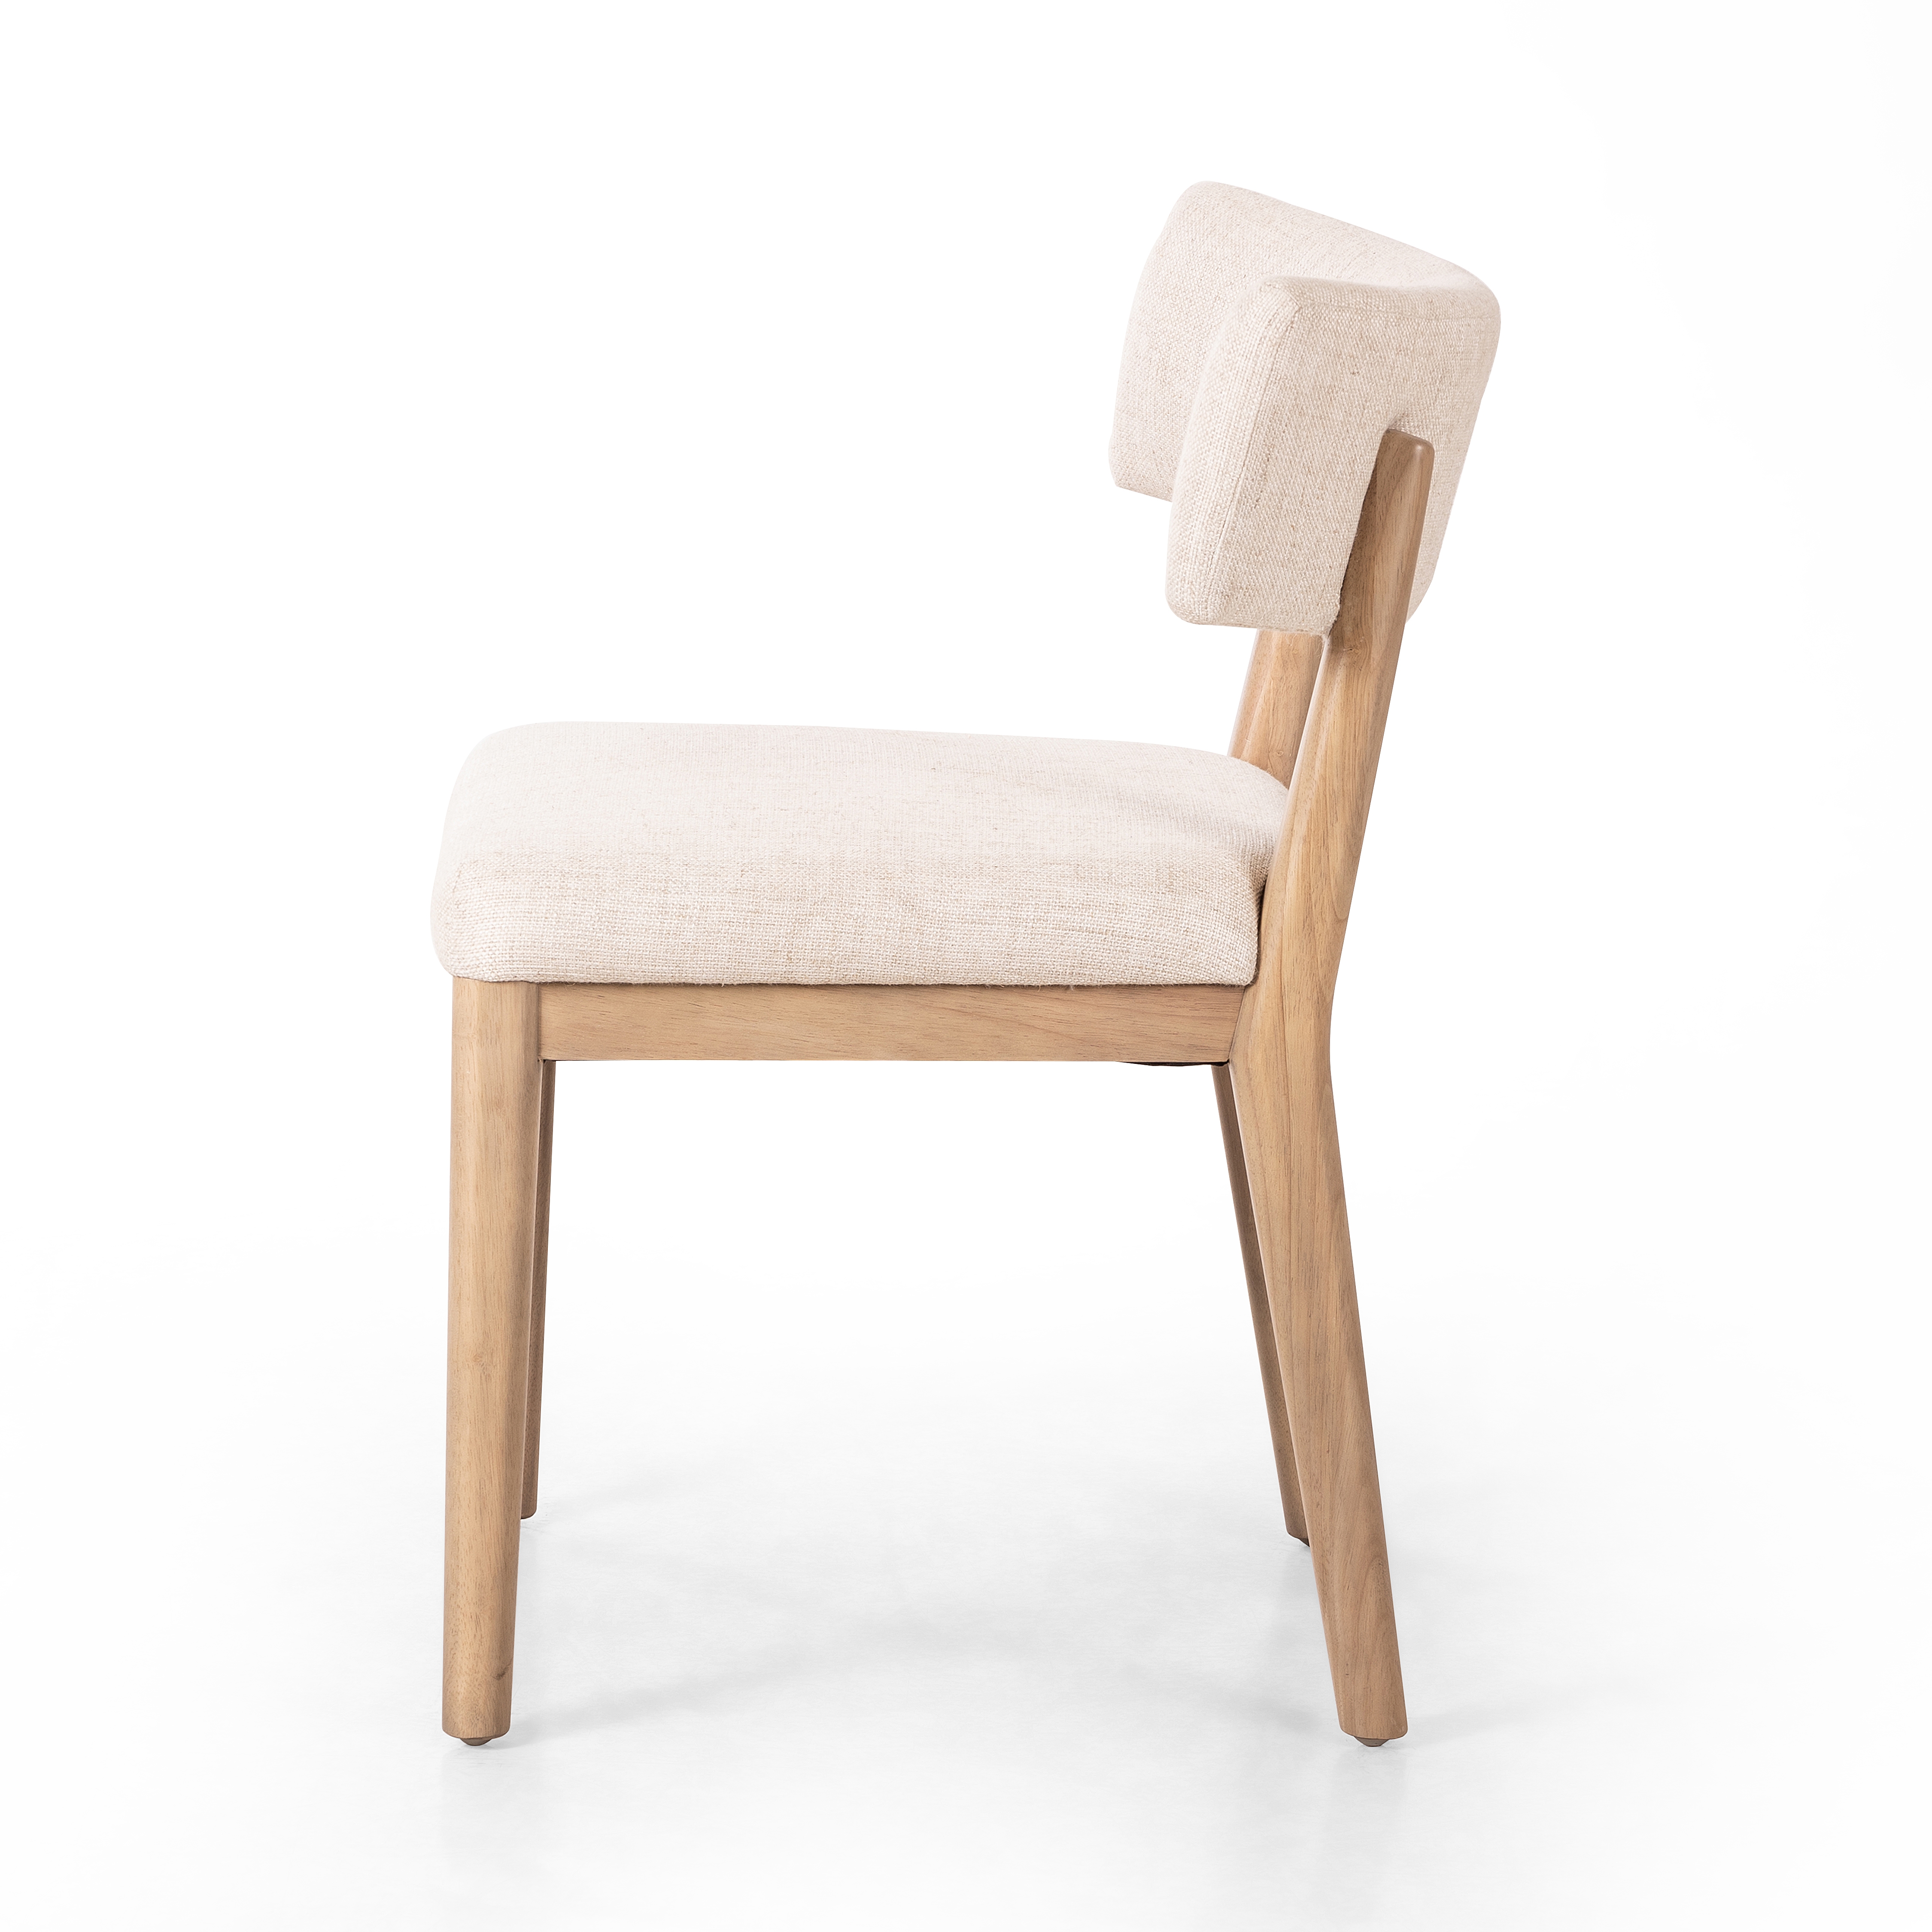 Cardell Dining Chair-Essence Natural - Image 5